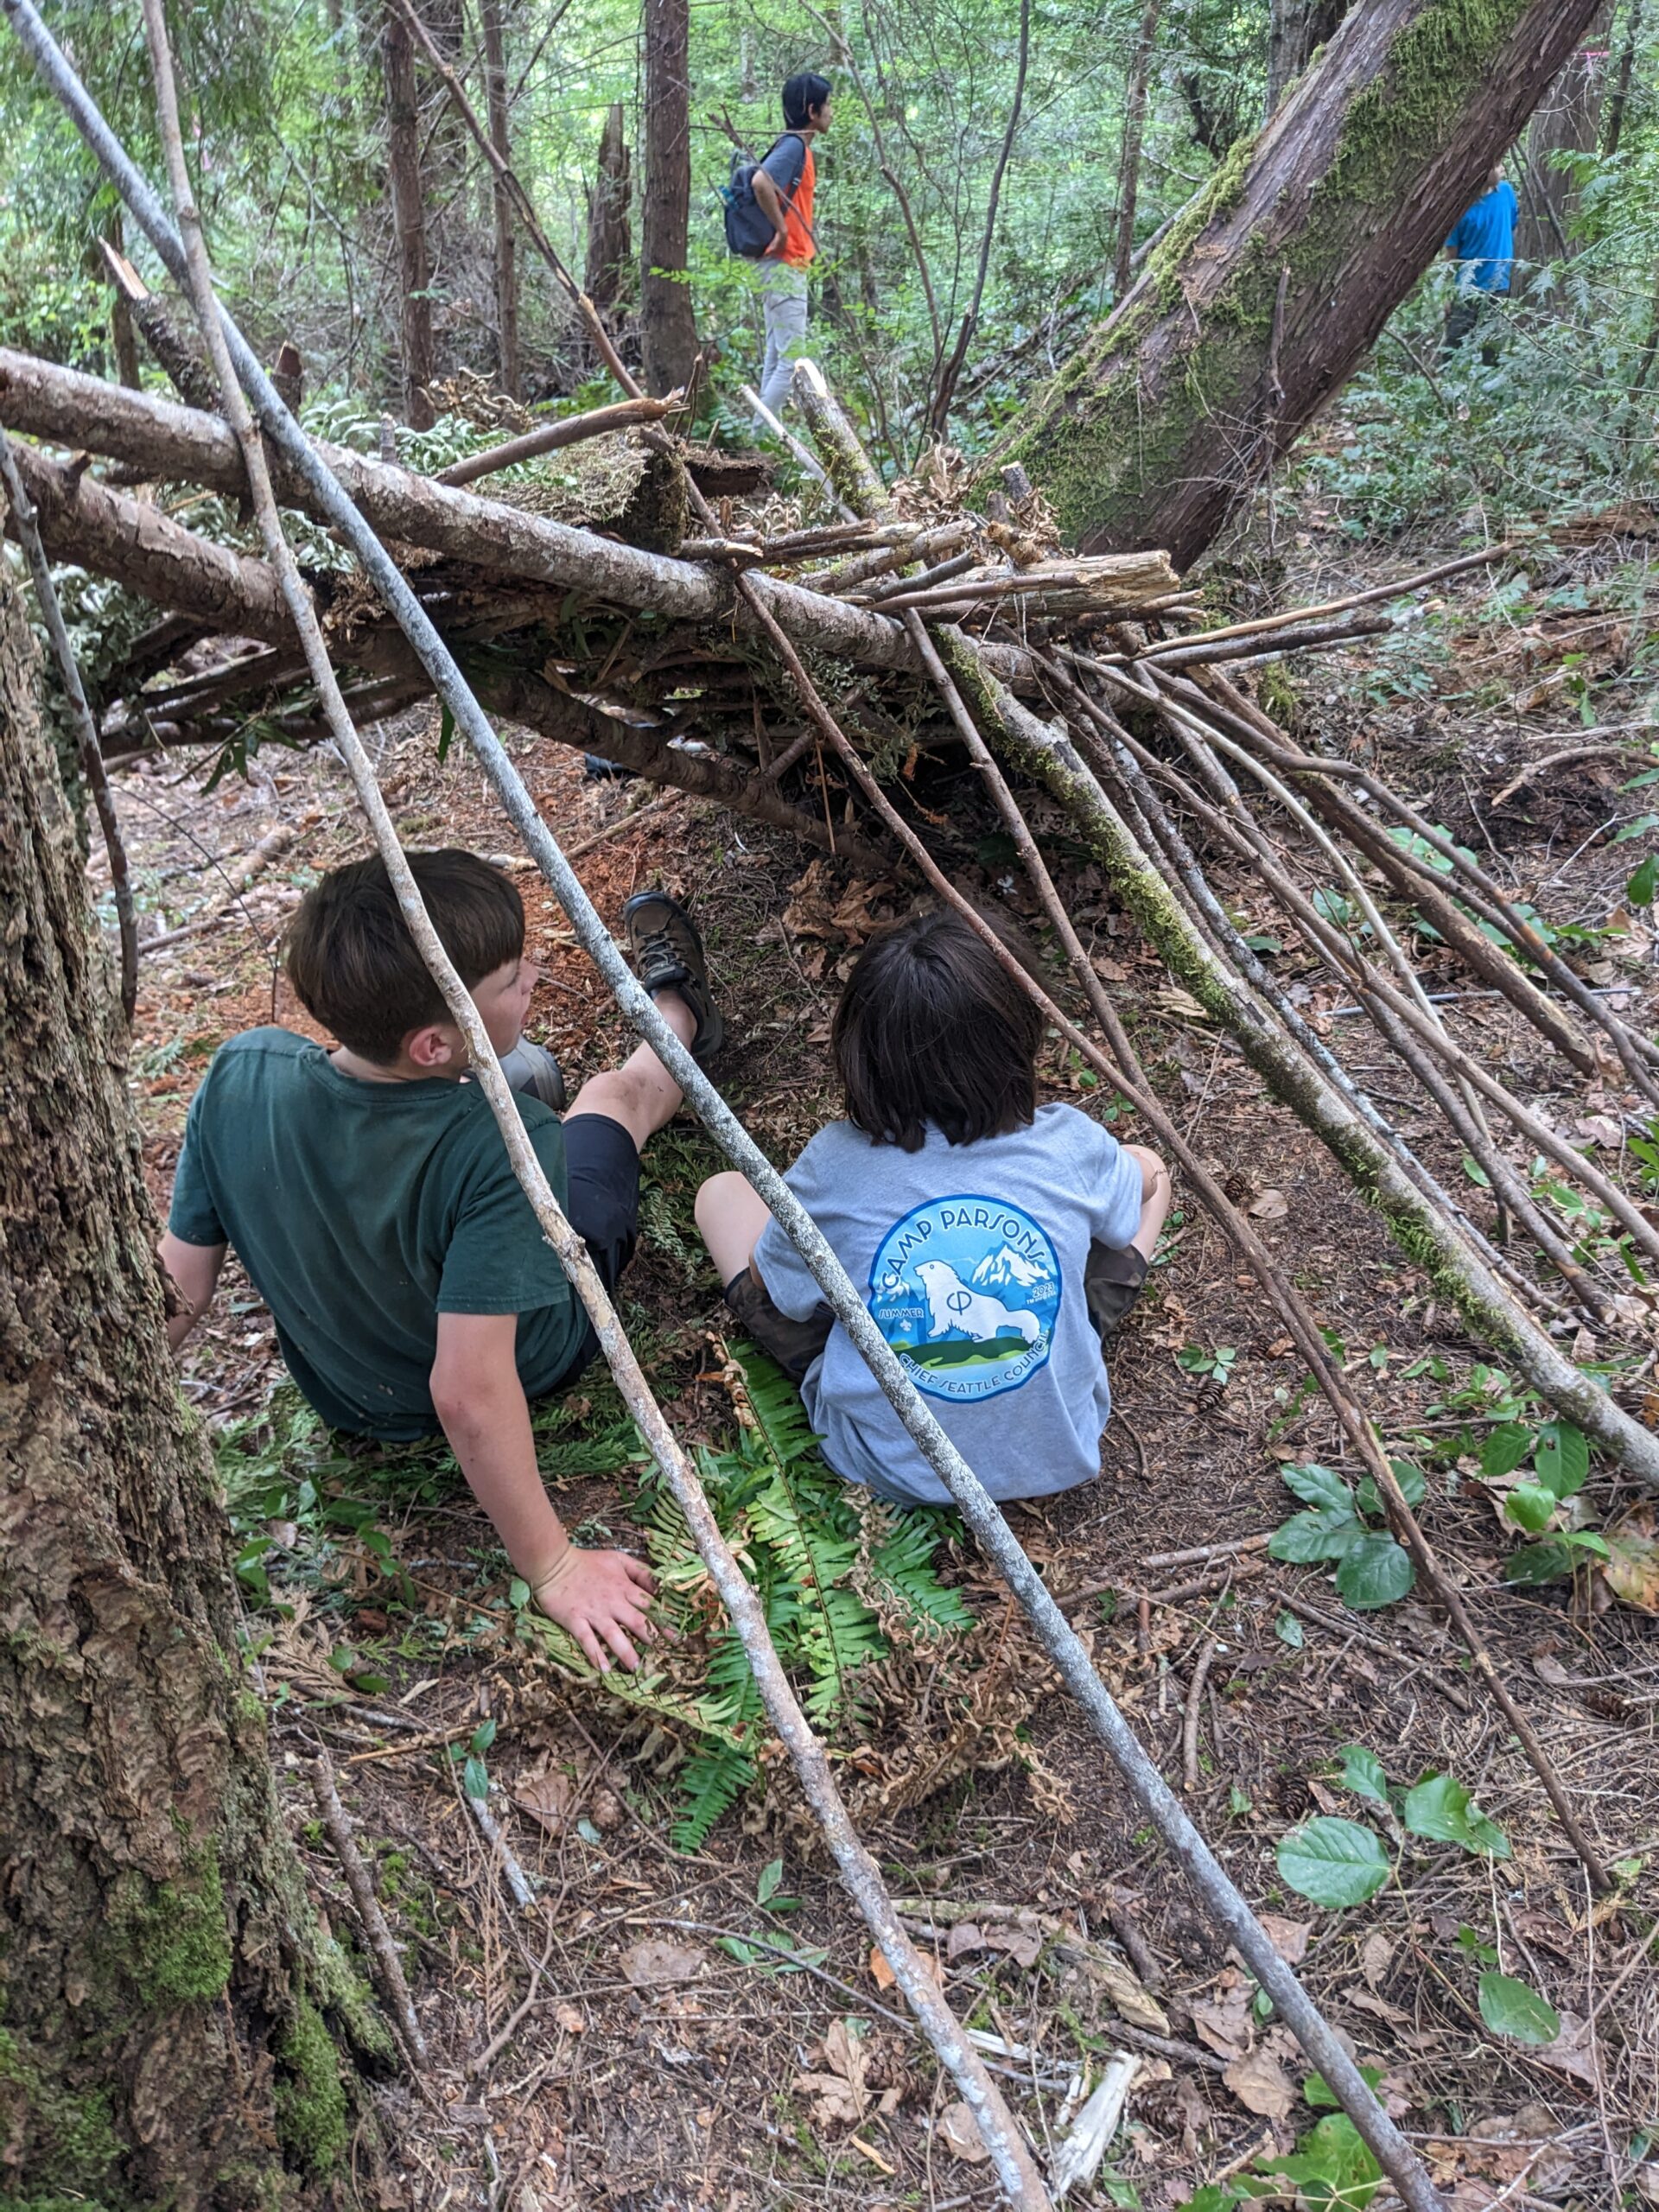 Scouts sitting in a survival shelter